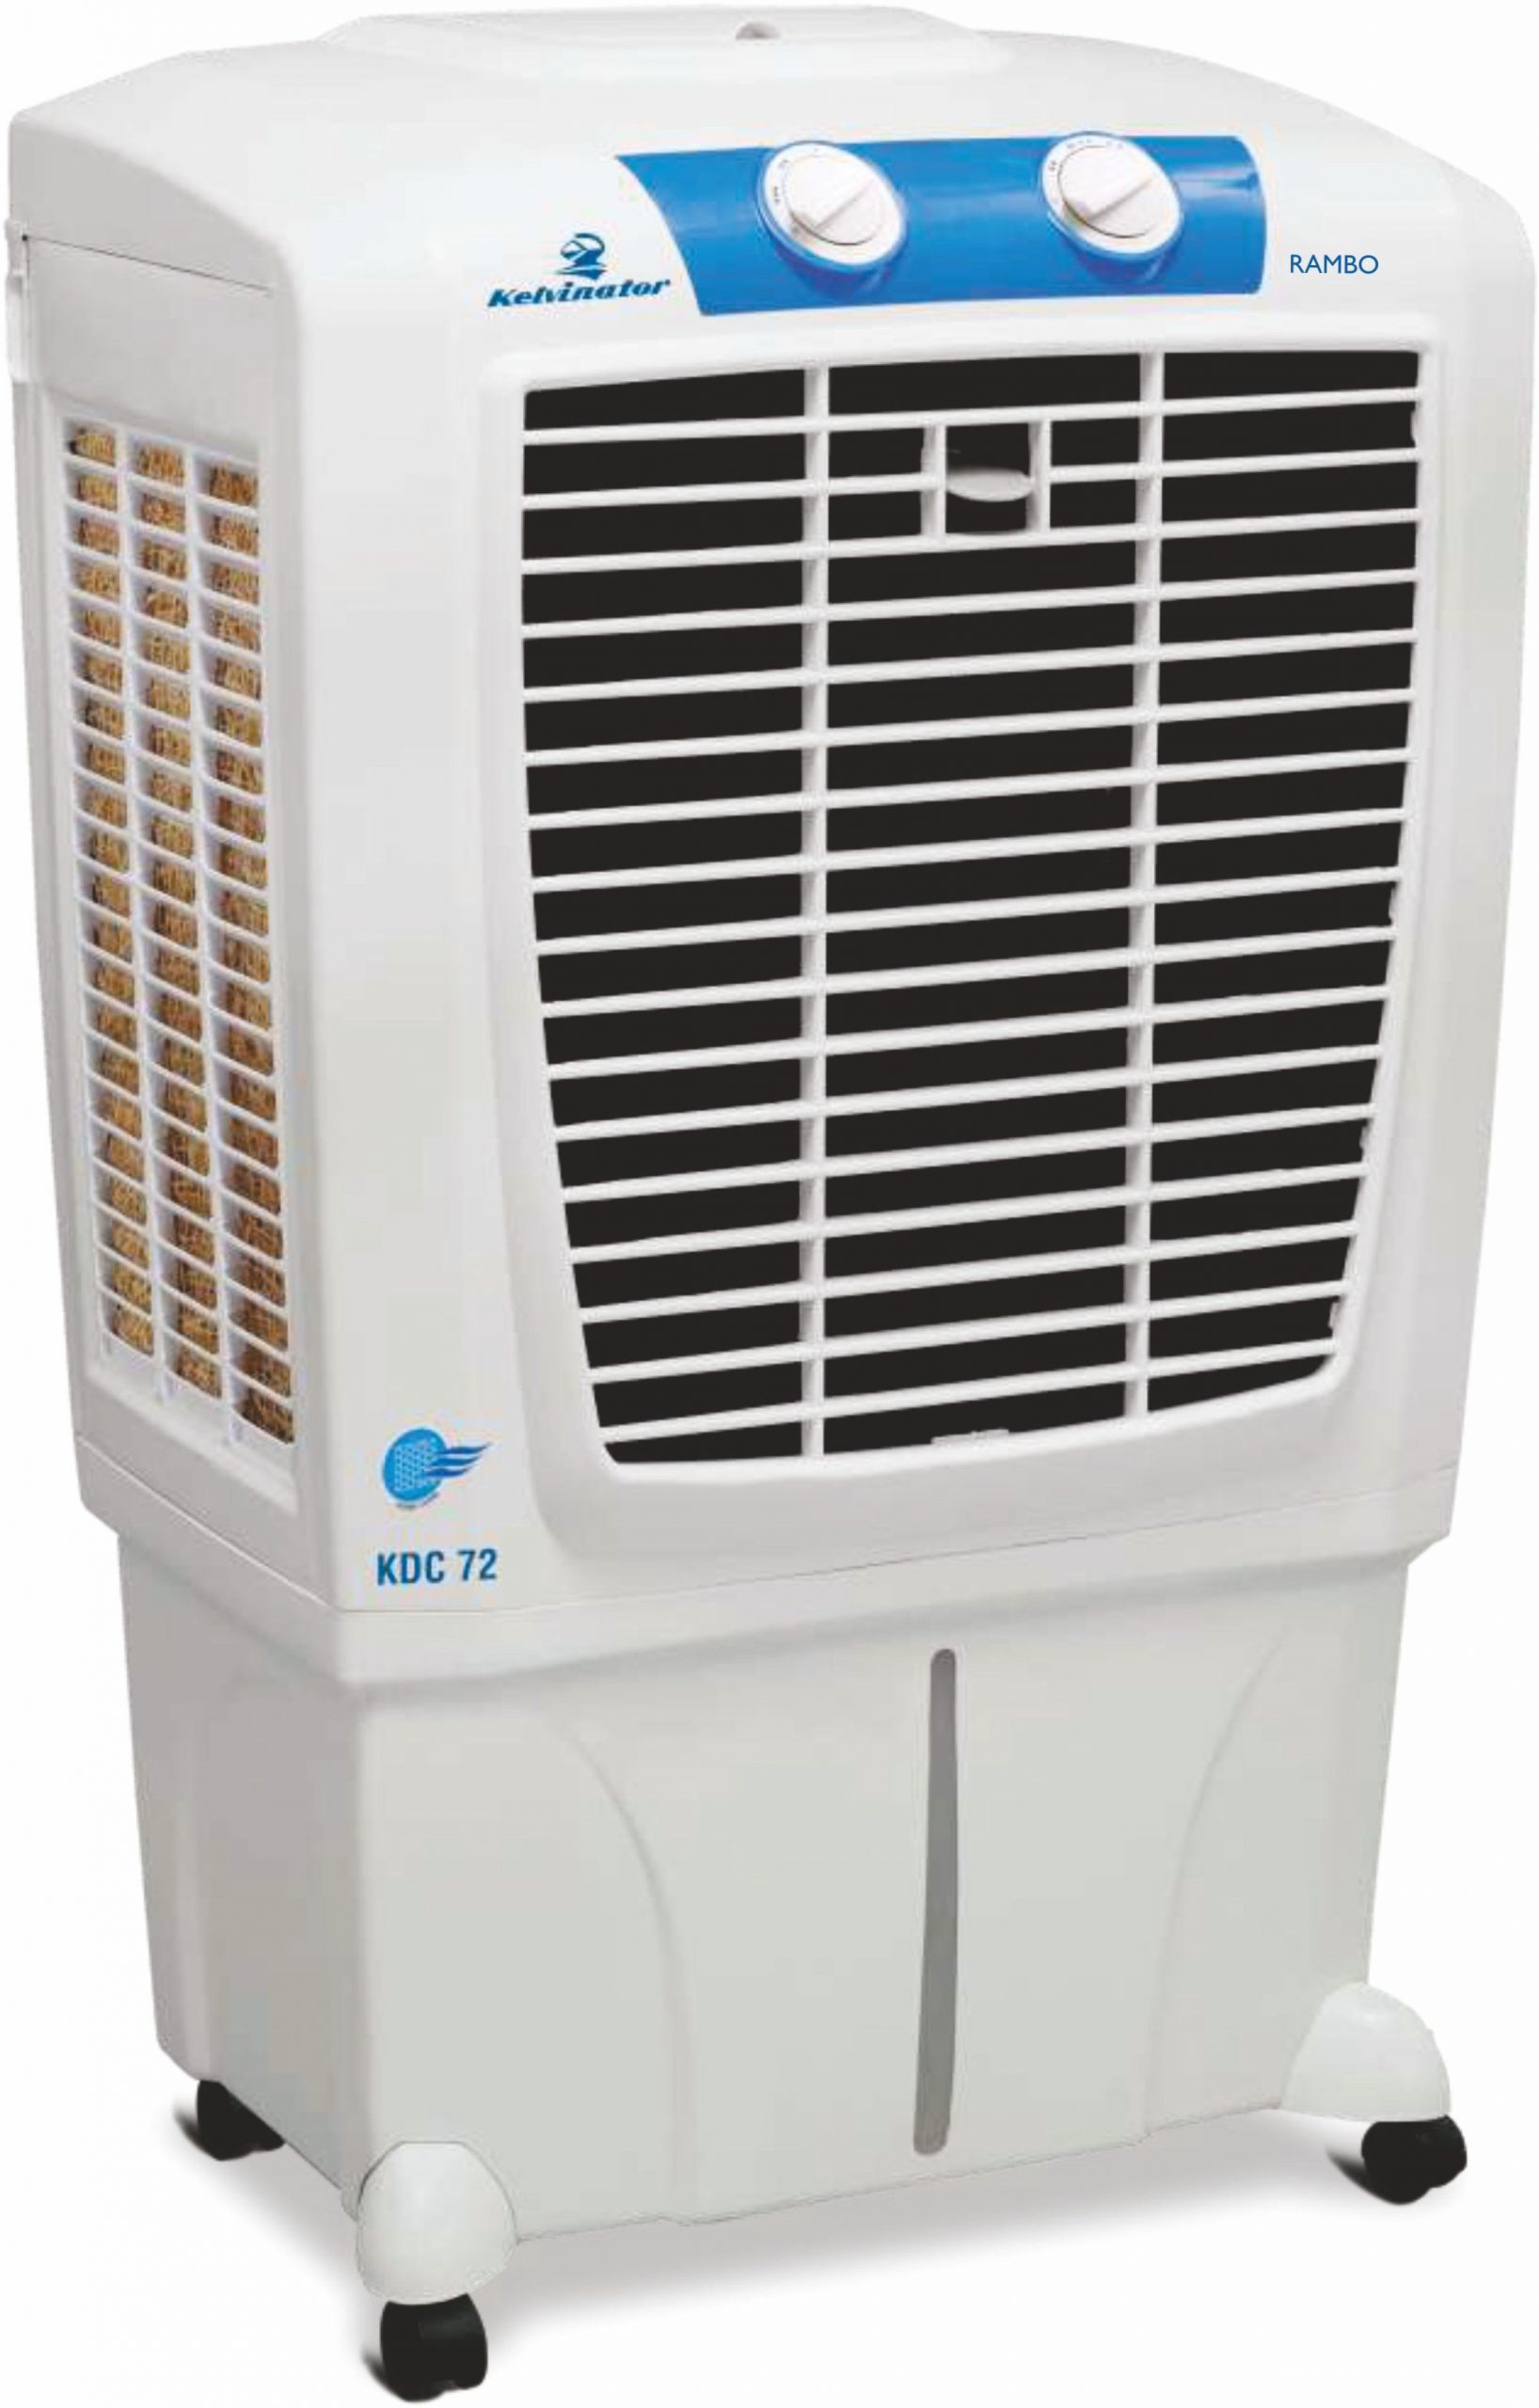 Kelvinator Rambo Air Cooler Desert Air Coolerwhite Body 72 intended for proportions 2448 X 3830